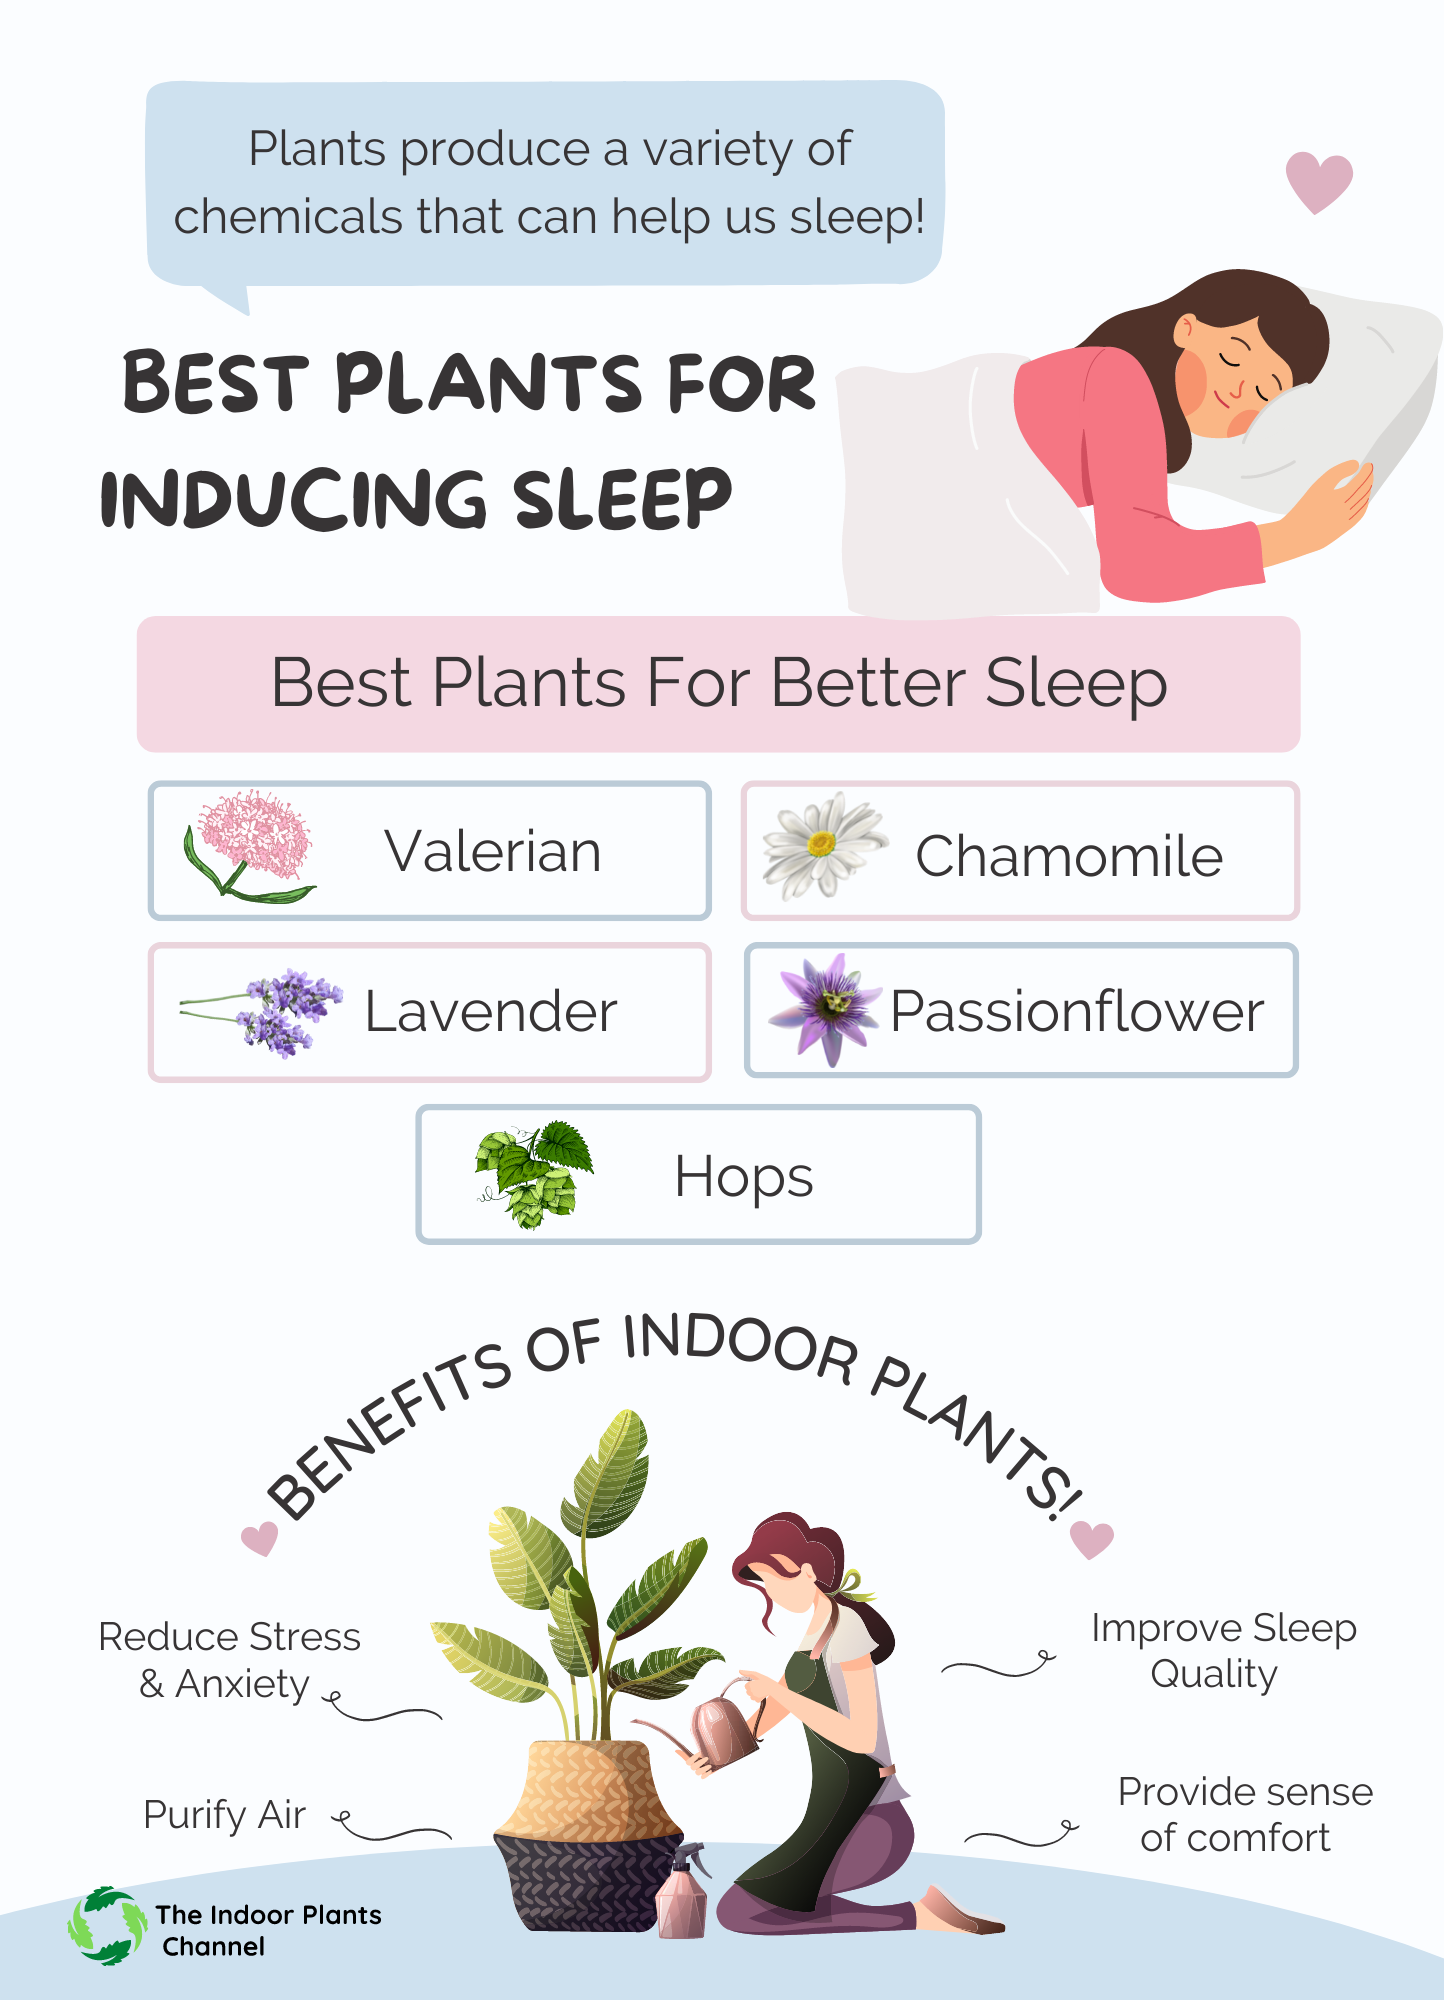 The Best Plants For Inducing Sleep